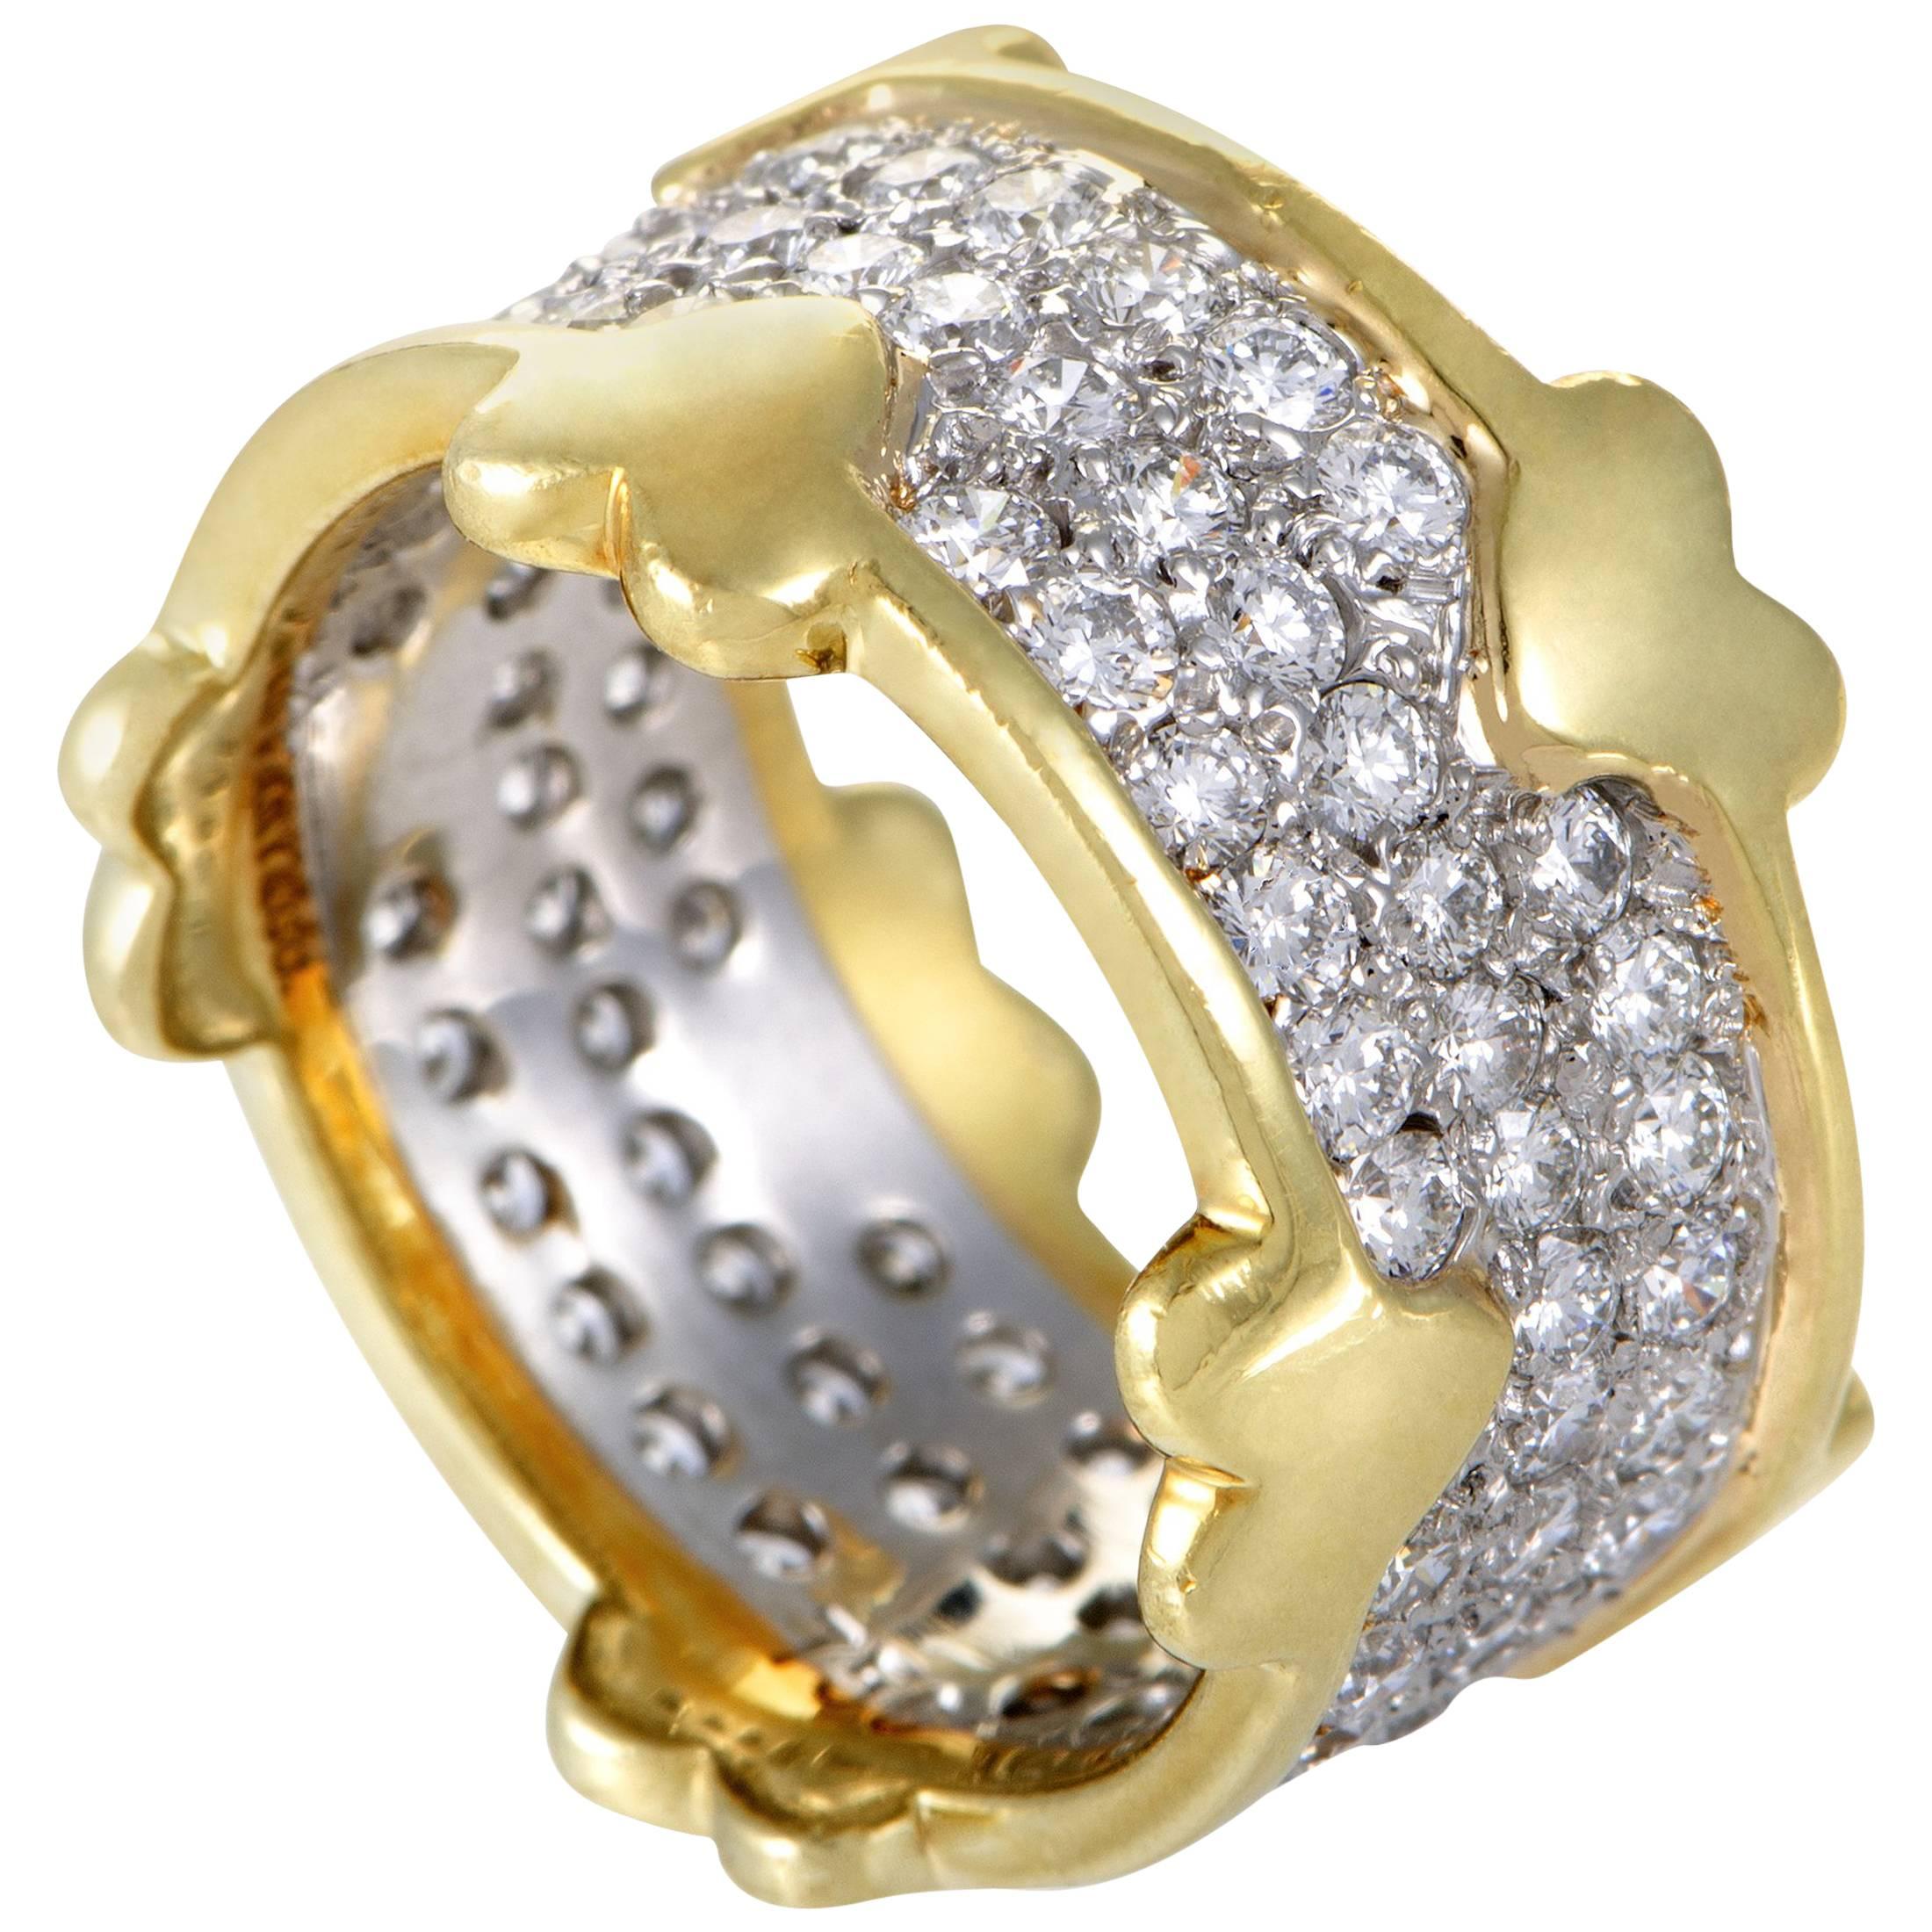 Tiffany & Co. Schlumberger Diamond Pave Gold Band Ring